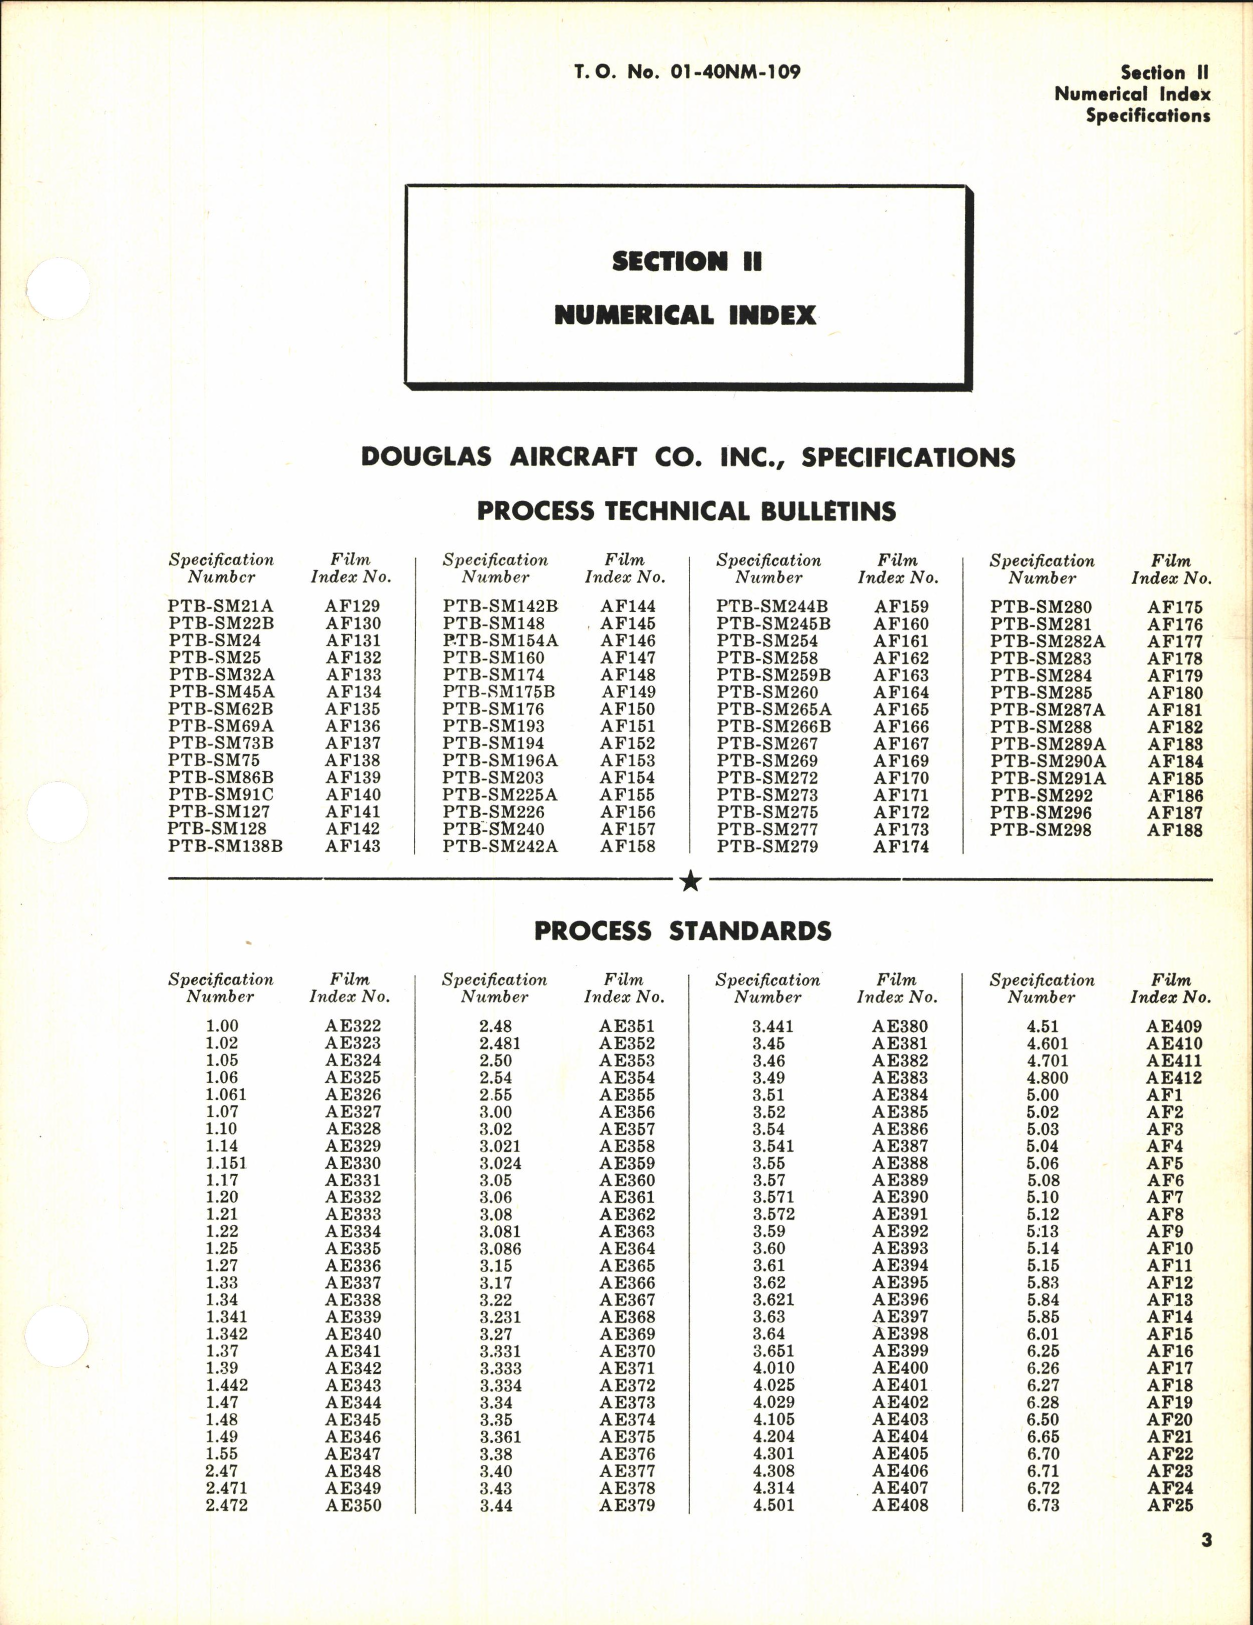 Sample page 5 from AirCorps Library document: Index of Drawings on Microfilm for C-54